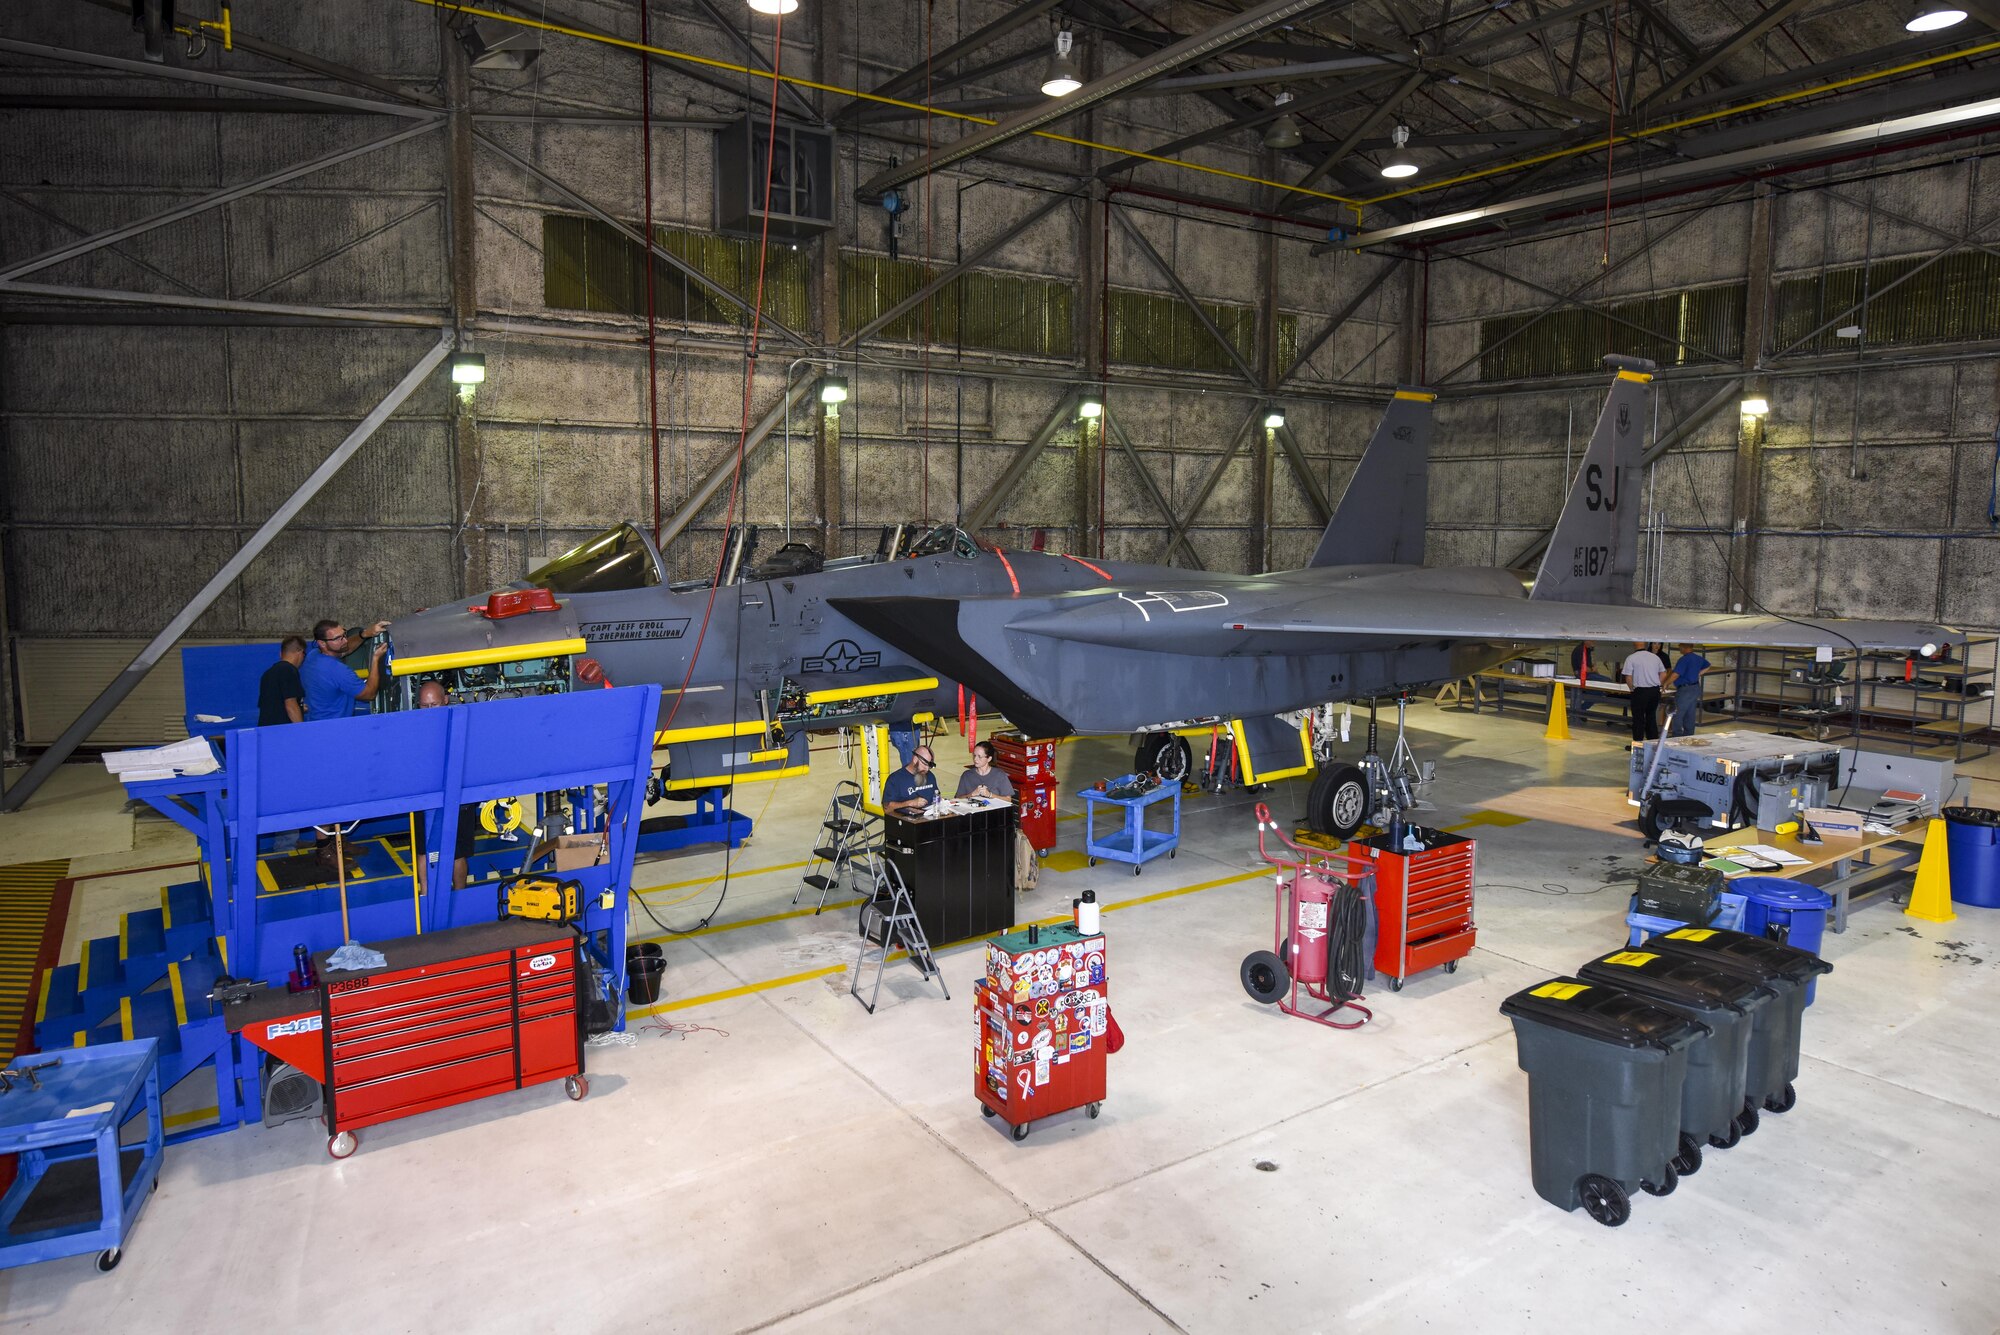 An F-15E Strike Eagle from the 336th Fighter Squadron sits in a hanger while members of the Radar Modernization Program Eagle modernization program team begin removing panels, Oct. 3, 2016, at Seymour Johnson Air Force Base, North Carolina. More than 90 jets at Seymour Johnson AFB will receive the radar modifications, projected to be completed in seven to nine years. (U.S. Air Force photo by Airman Shawna L. Keyes)